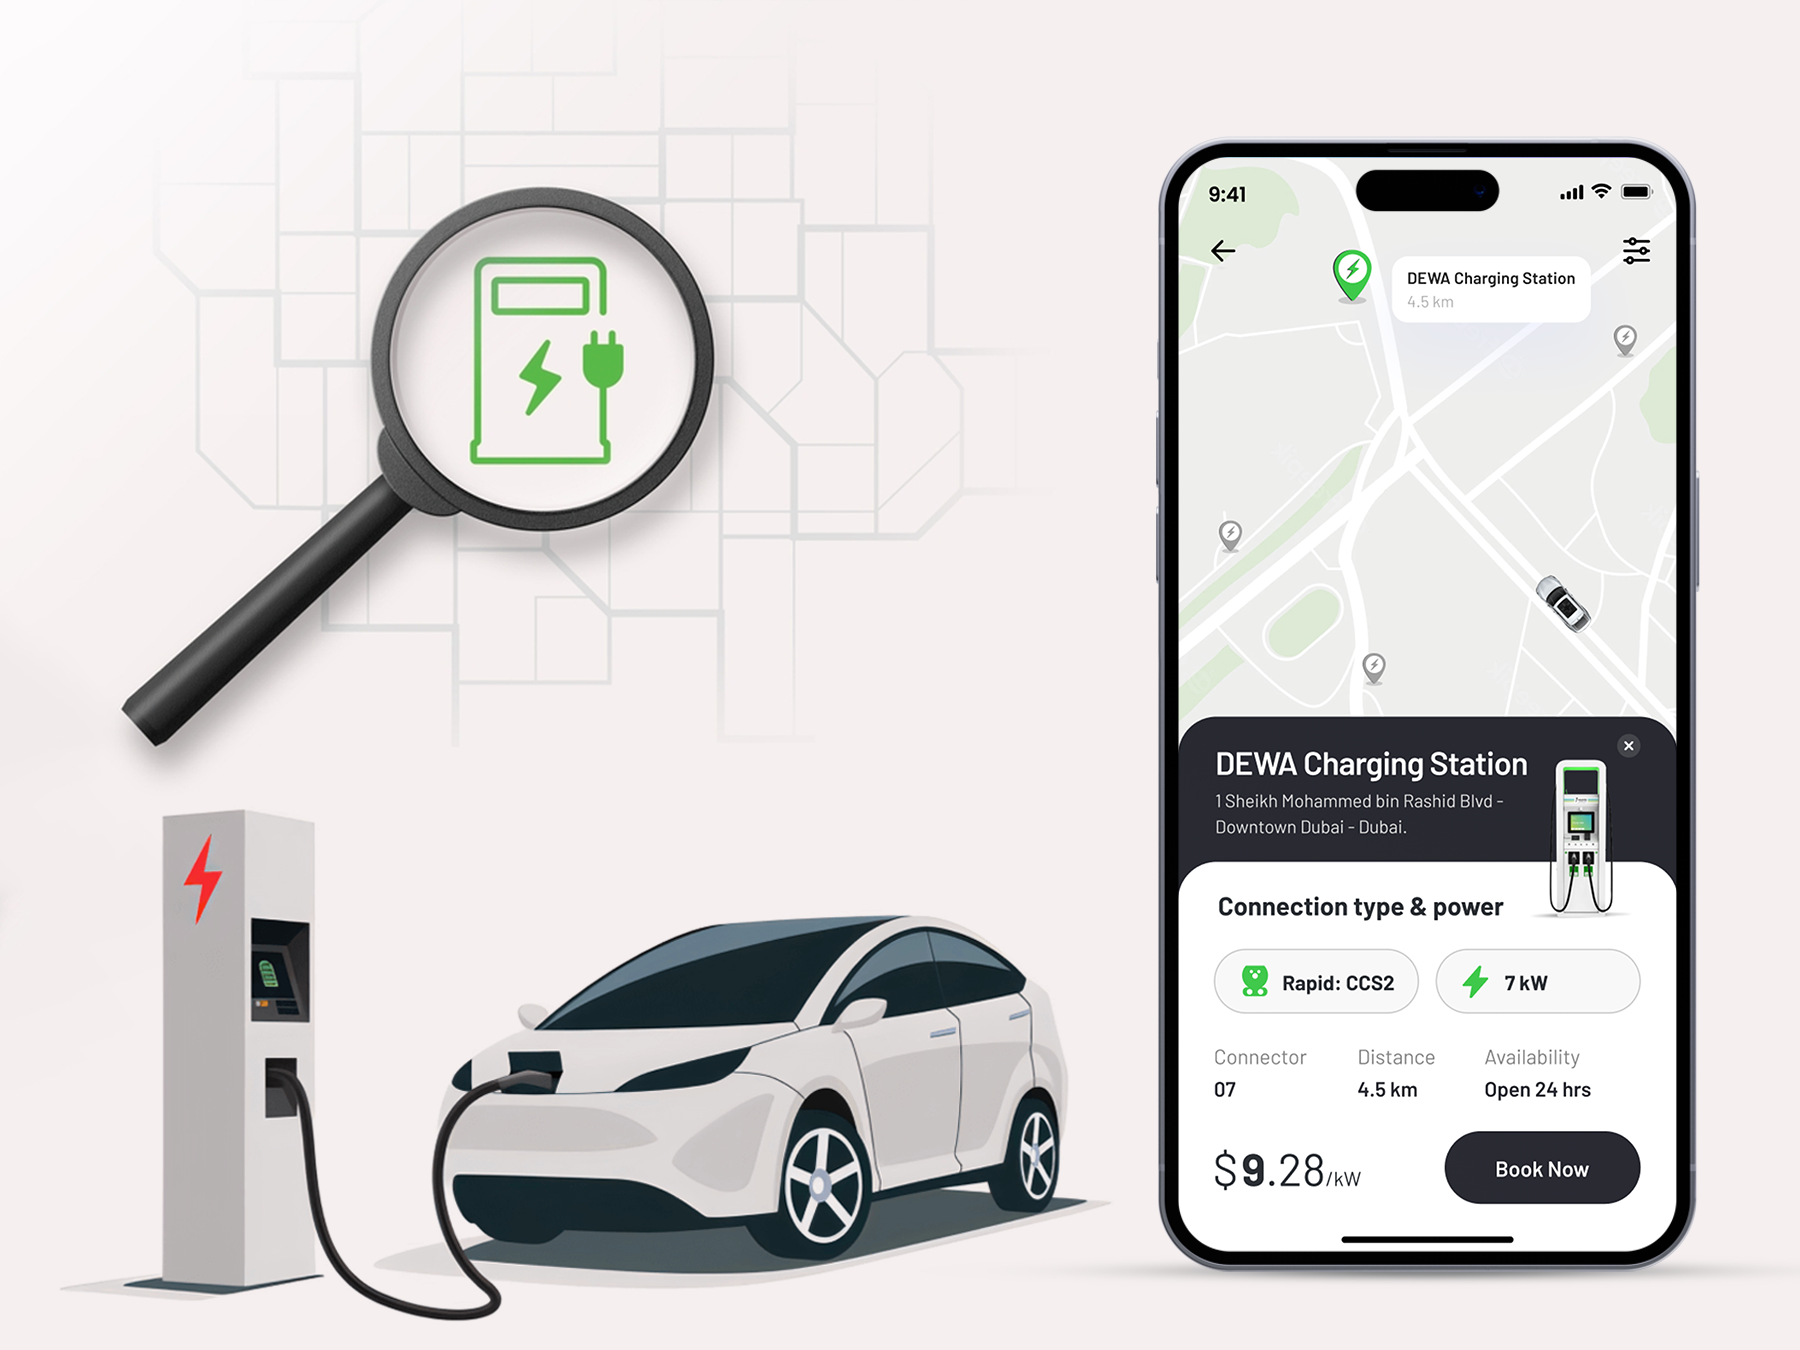 EV Charging Station Finder App Development: Cost and Features